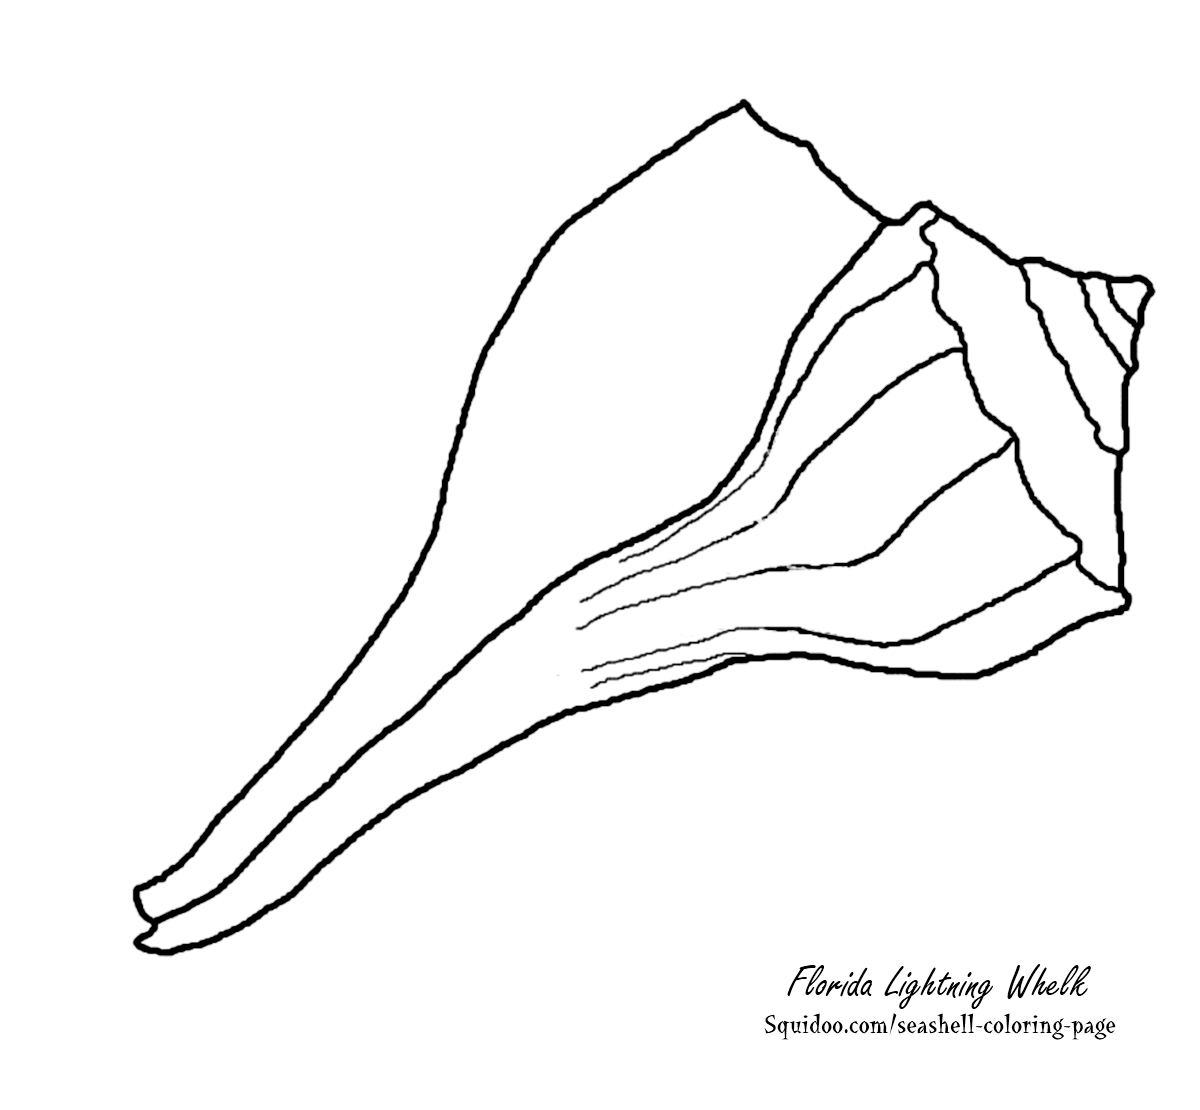 Conch Shell Outline - The Hippest Galleries!